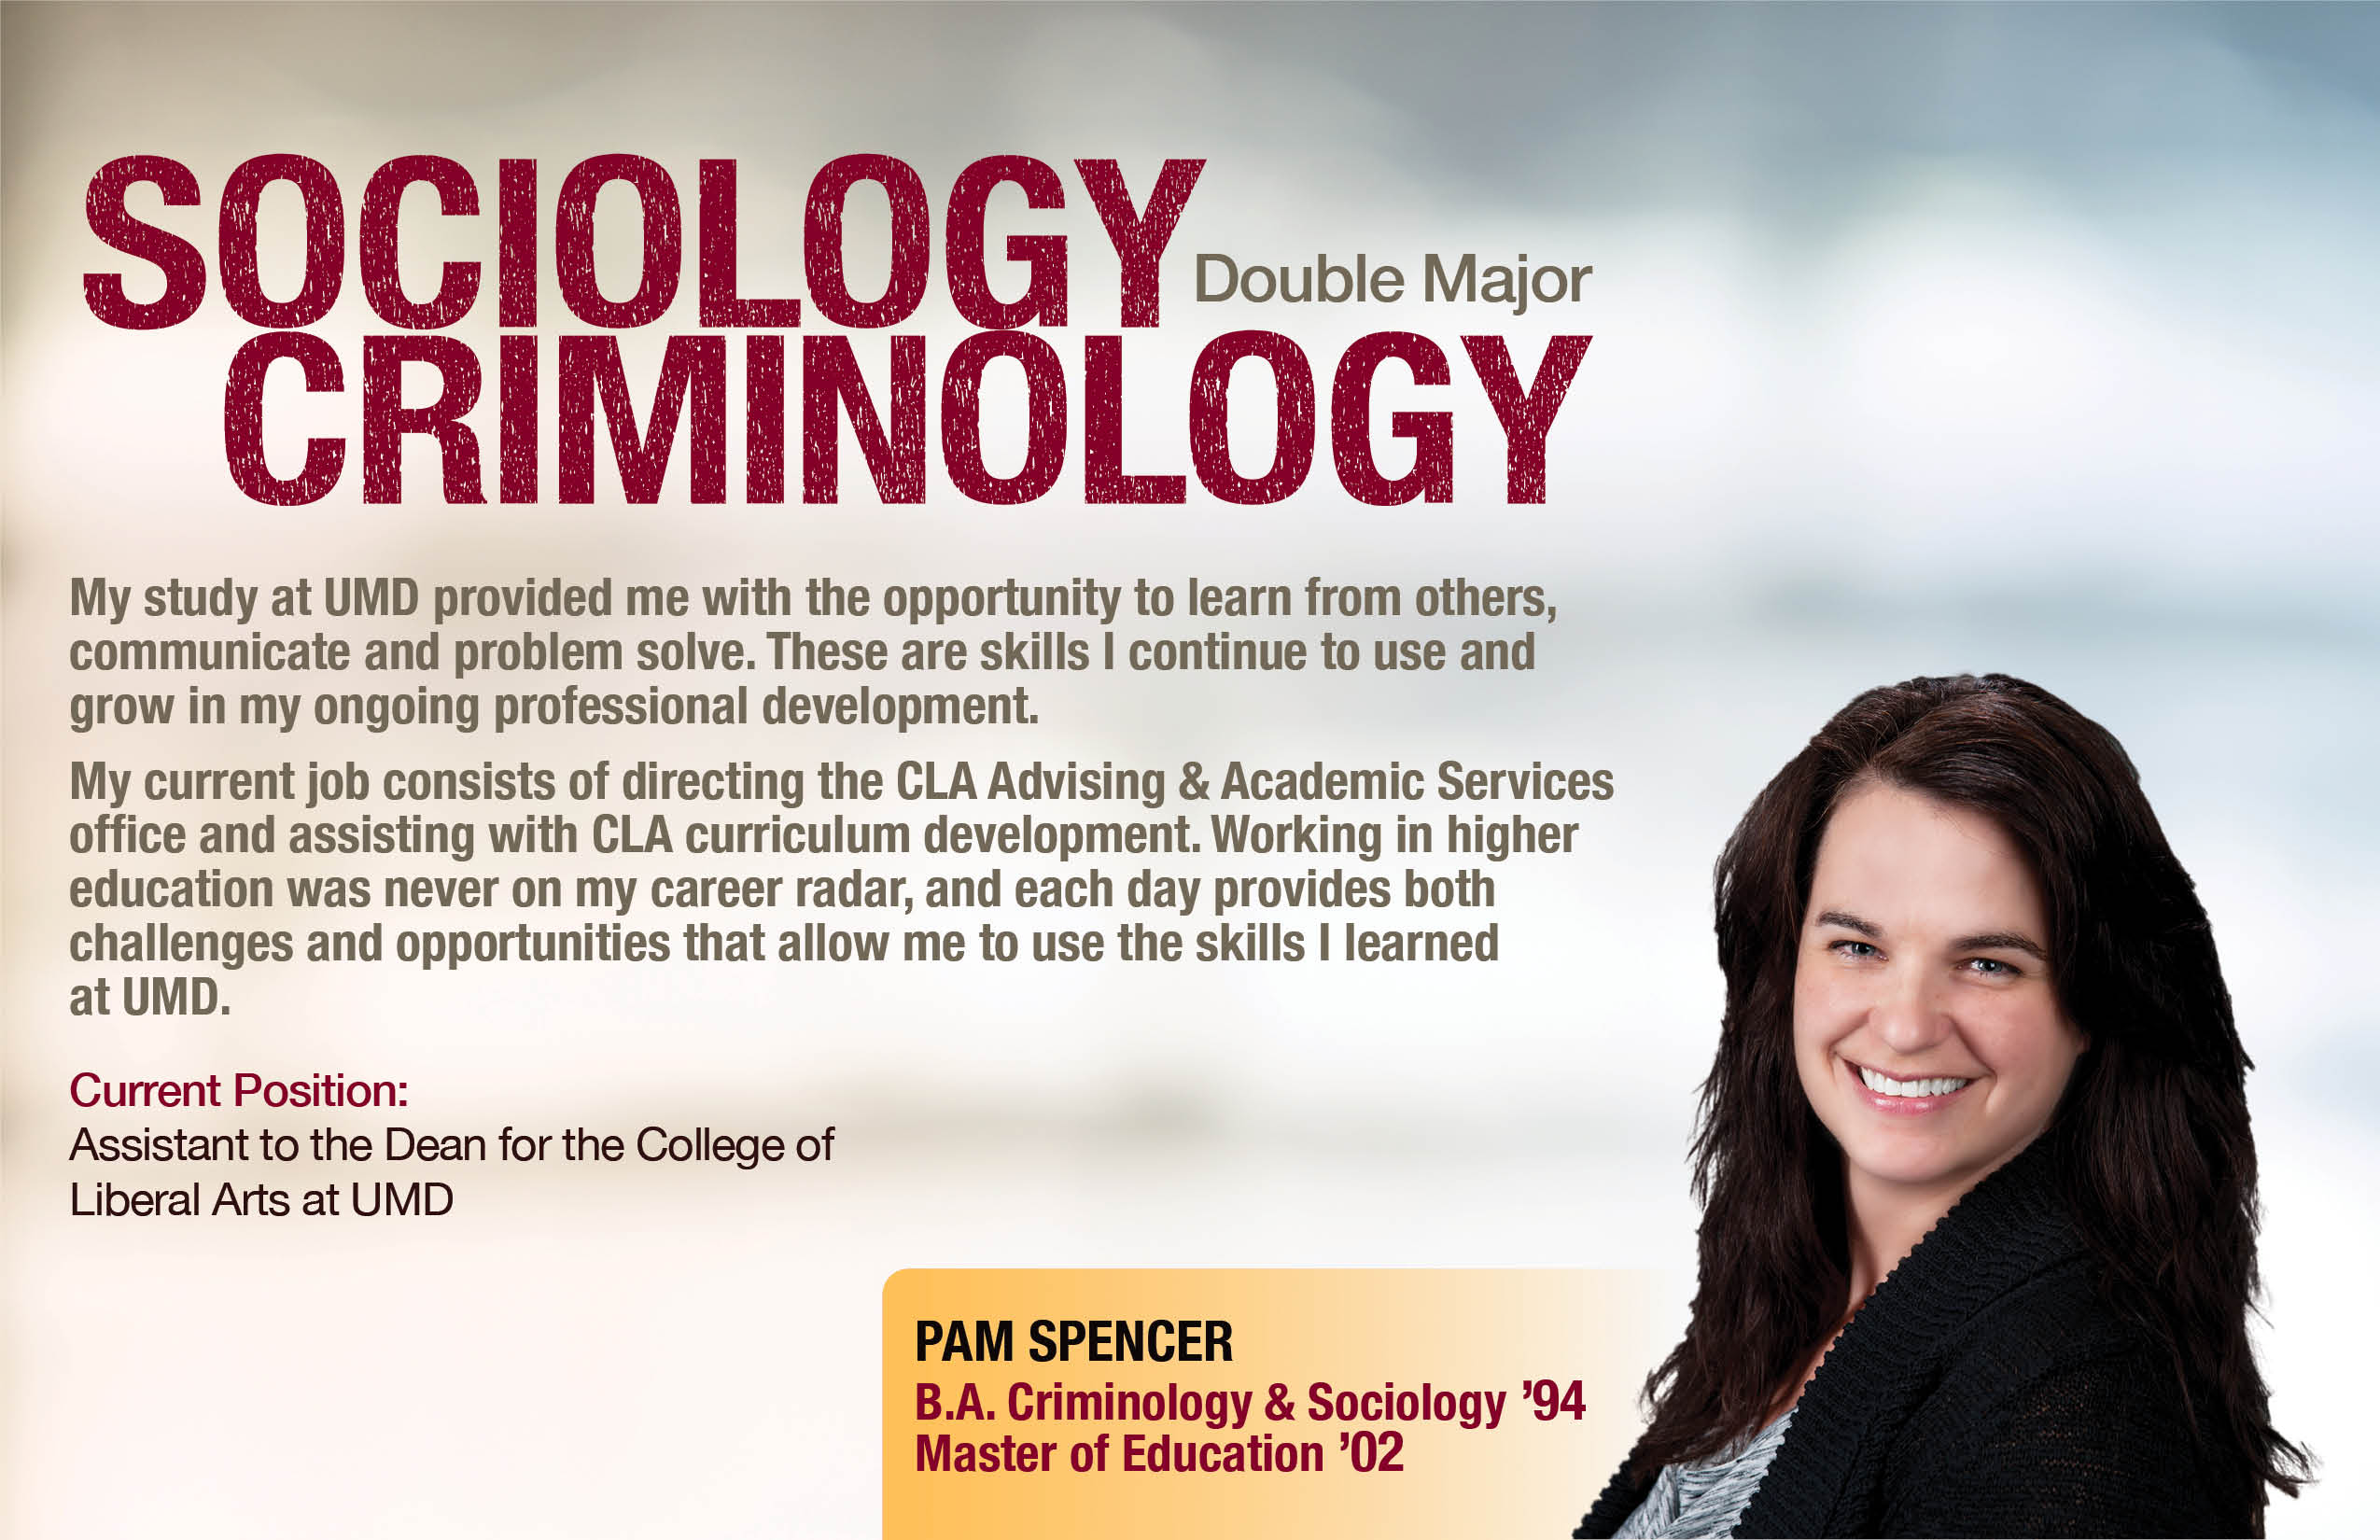 light colored blurred background with maroon text "Sociology Criminology double major" and photo of a Pam Spencer